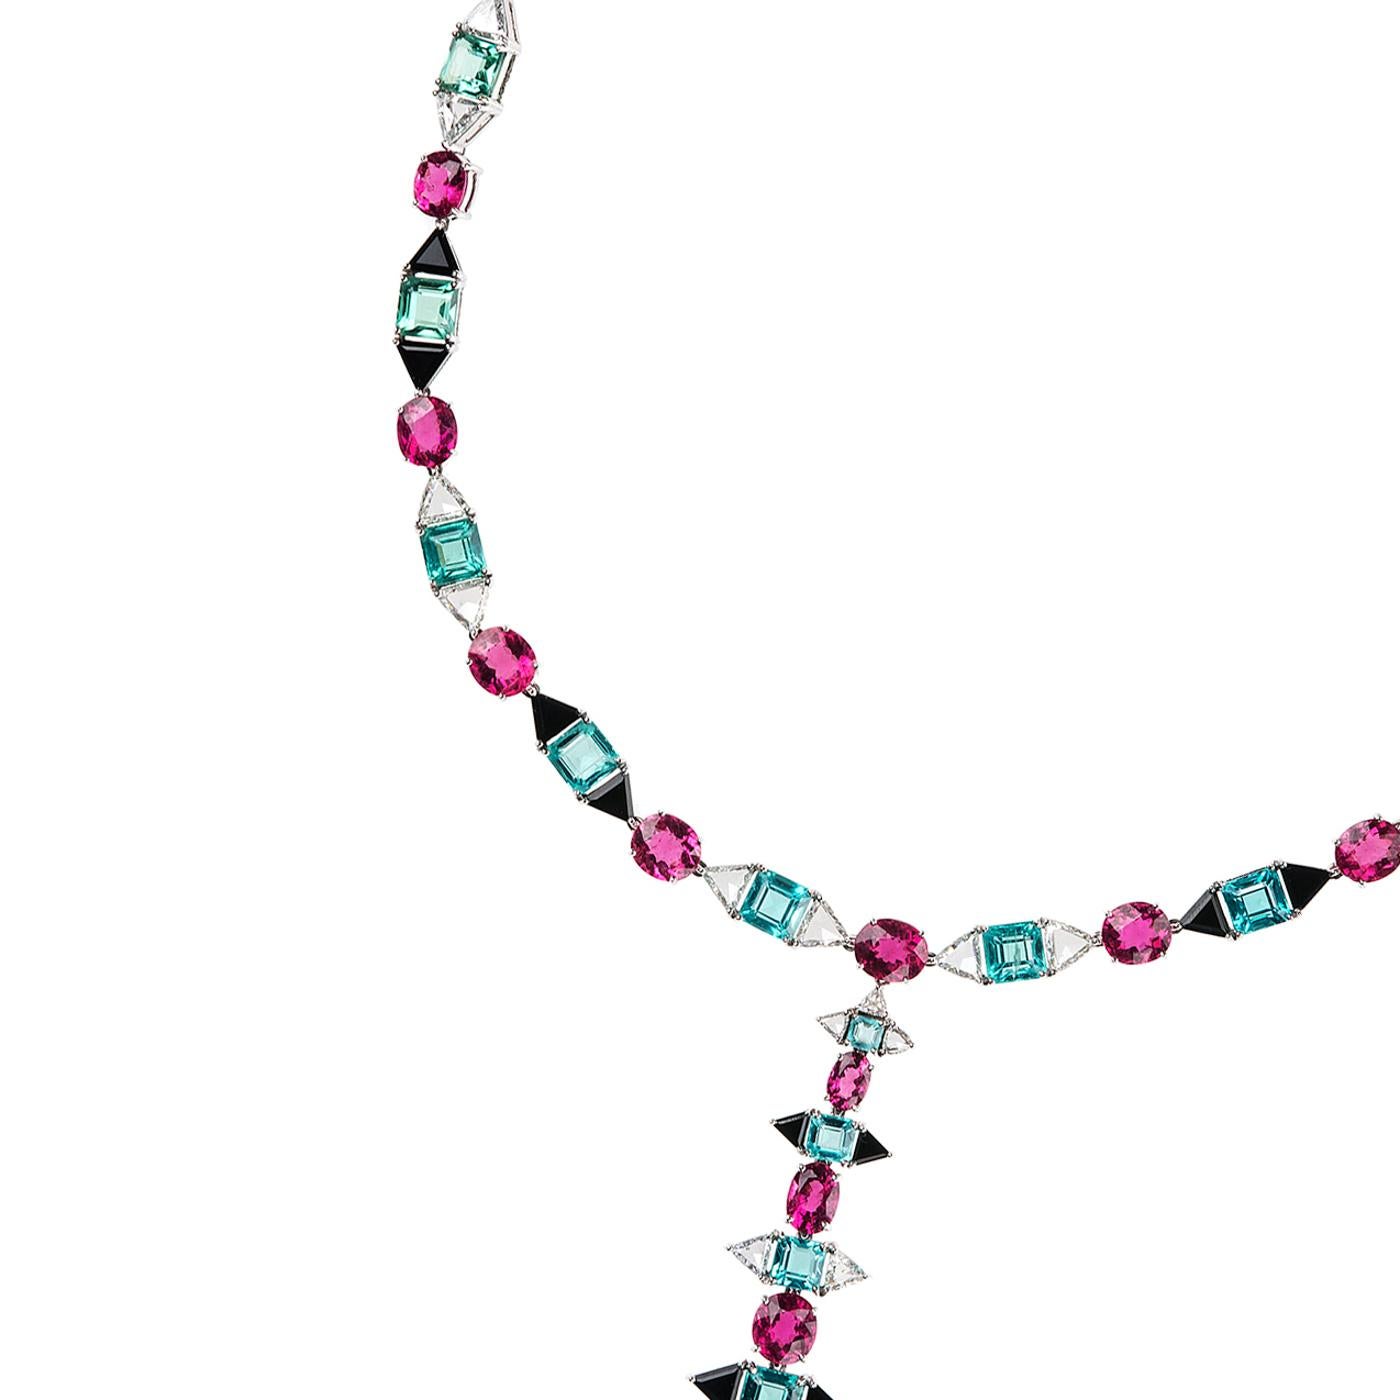 Nikos Koulis Eden Collection one-of-a-kind necklace 18Κ white gold multicolour necklace with 8.55 cts rose cut trillion white diamonds, 20.77 cts rubellites, 24.77 apatites and 6.18 cts black onyx